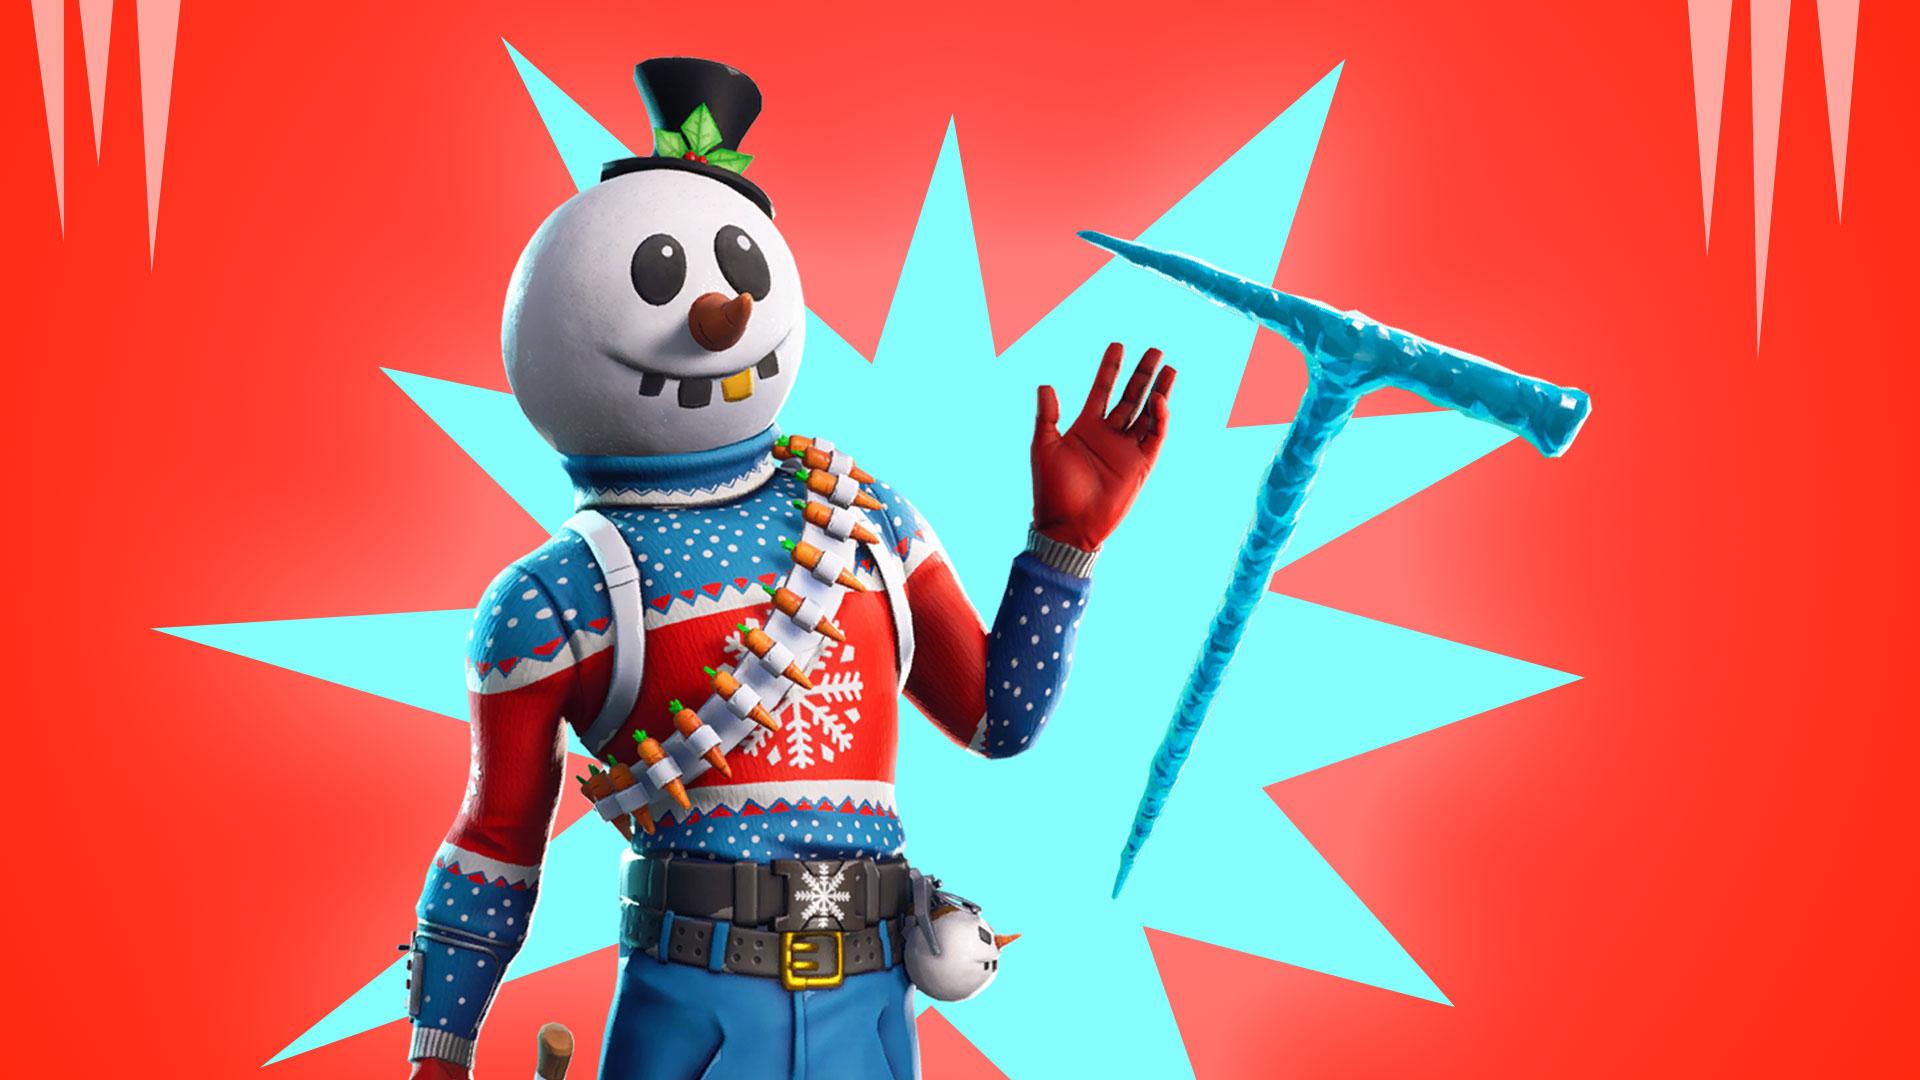 Christmas Skins arrive in Fortnite: Slushy soldier, Icicle pickaxe